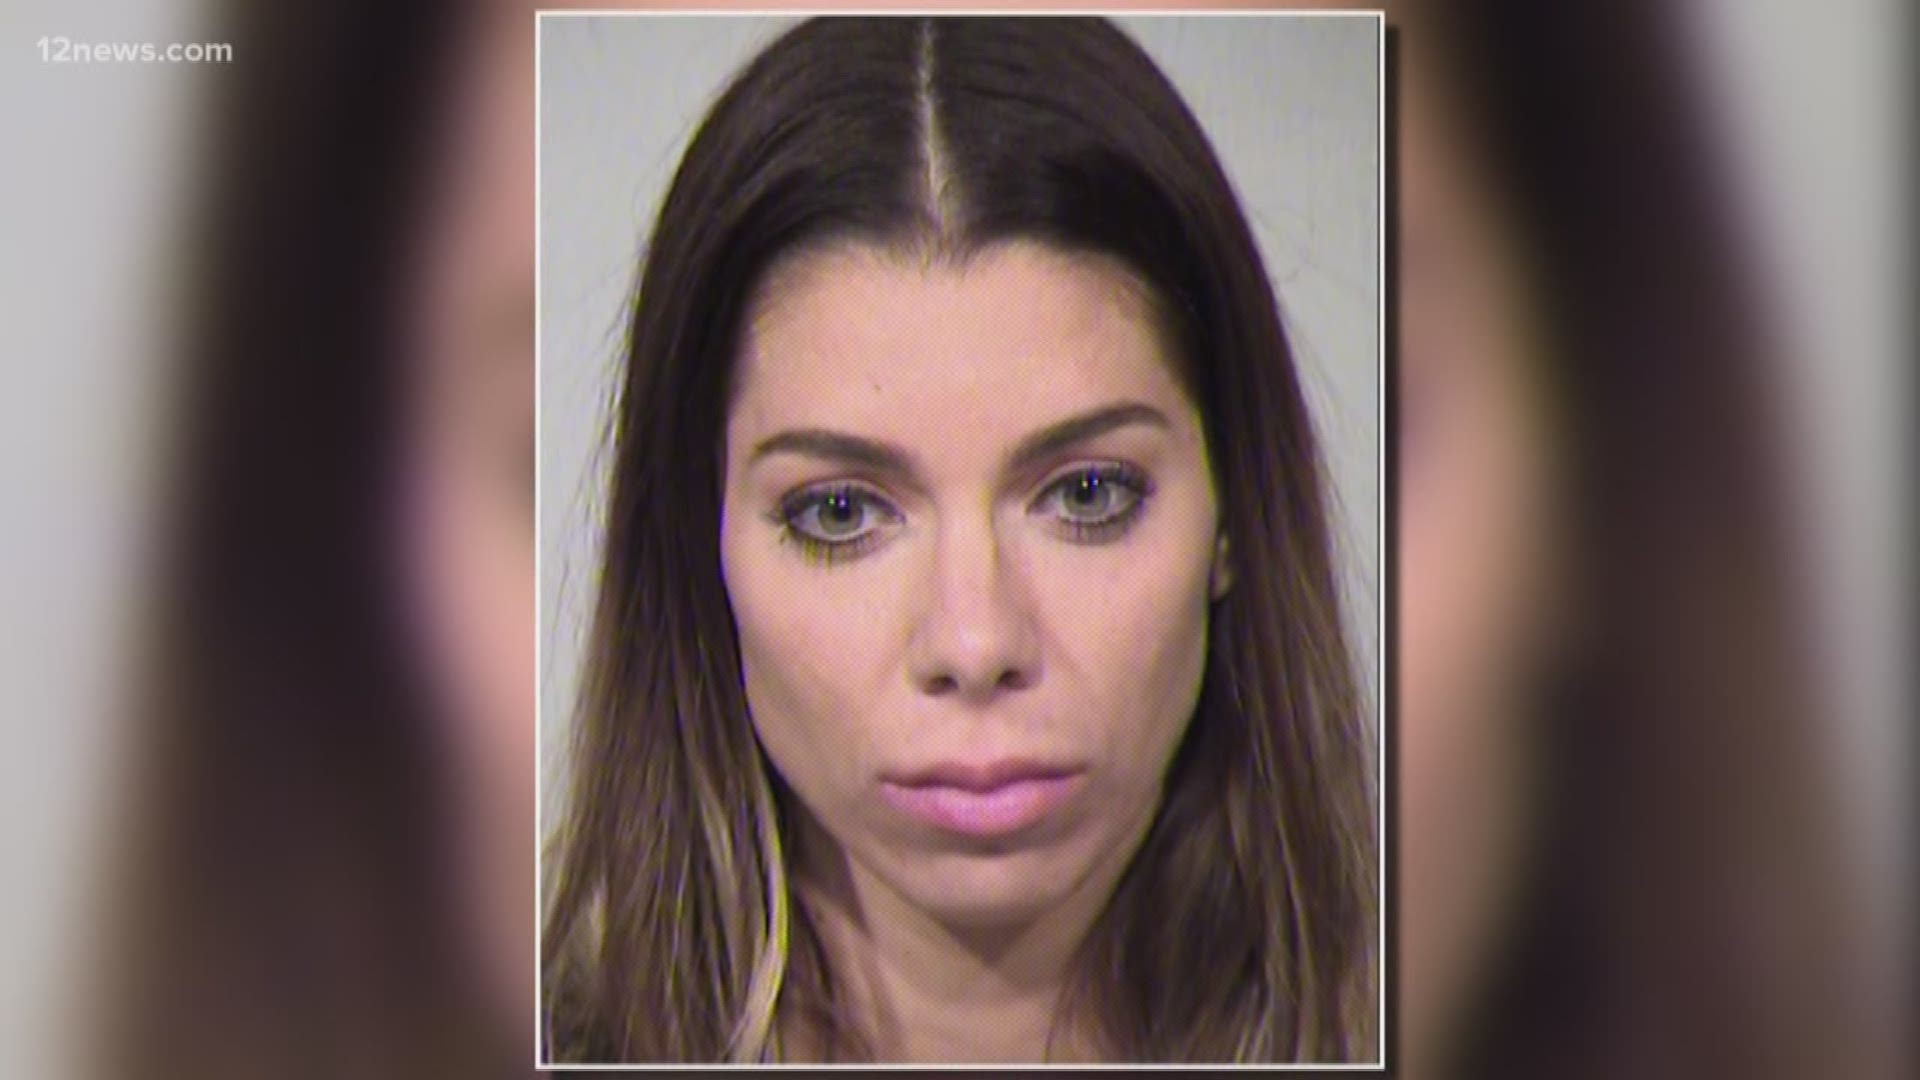 Alexandra Cilentos is facing reckless abuse charges after leaving her 4-year-old daughter alone to go clubbing. Cilentos told police she didn't know her child could get out of the apartment.